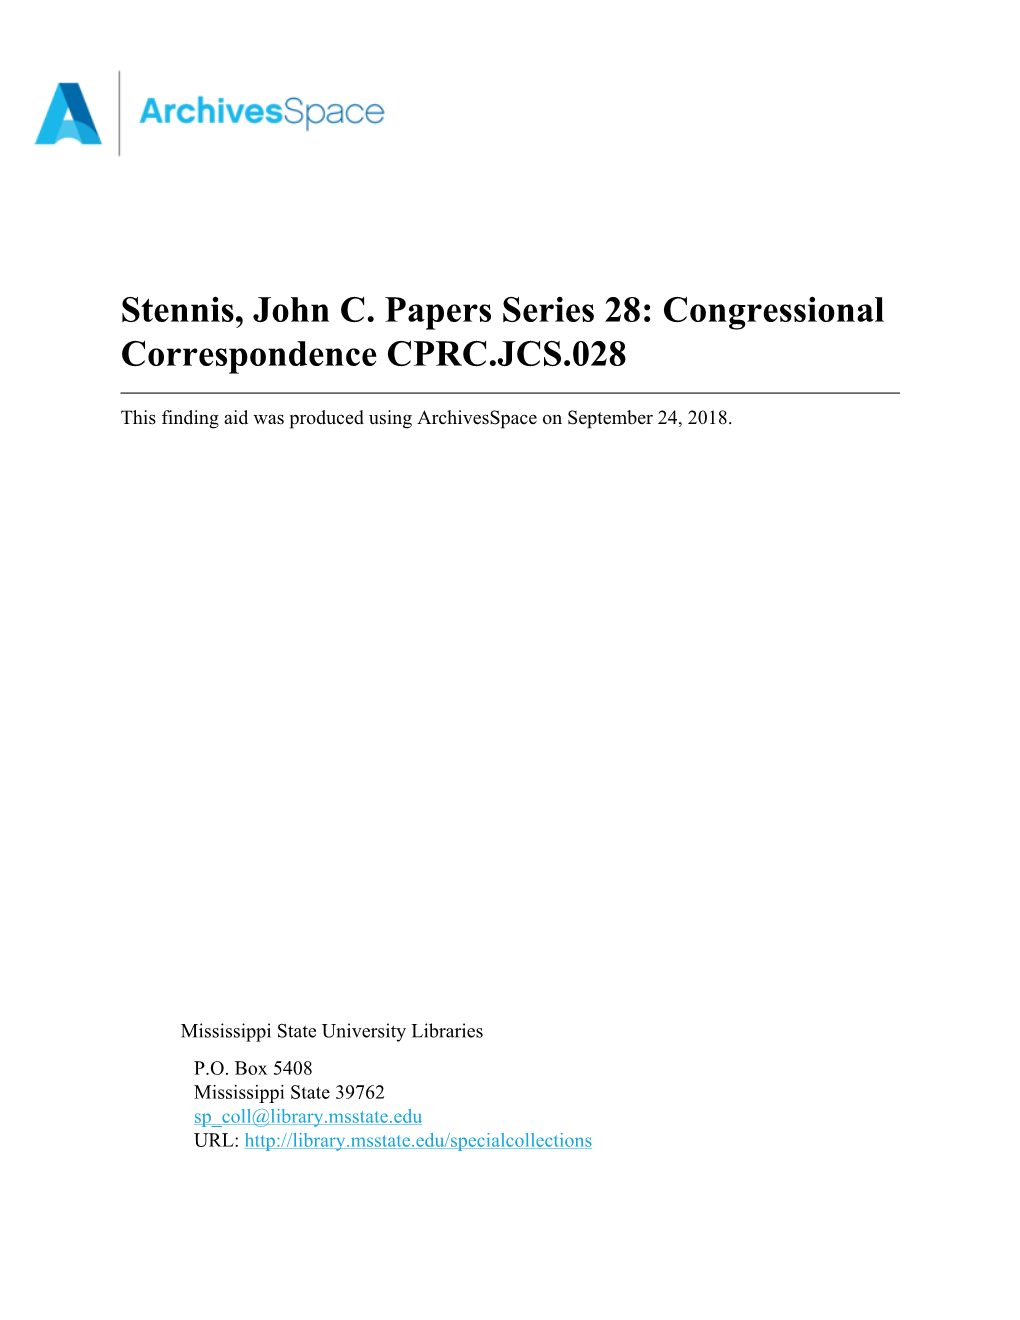 Stennis, John C. Papers Series 28: Congressional Correspondence CPRC.JCS.028